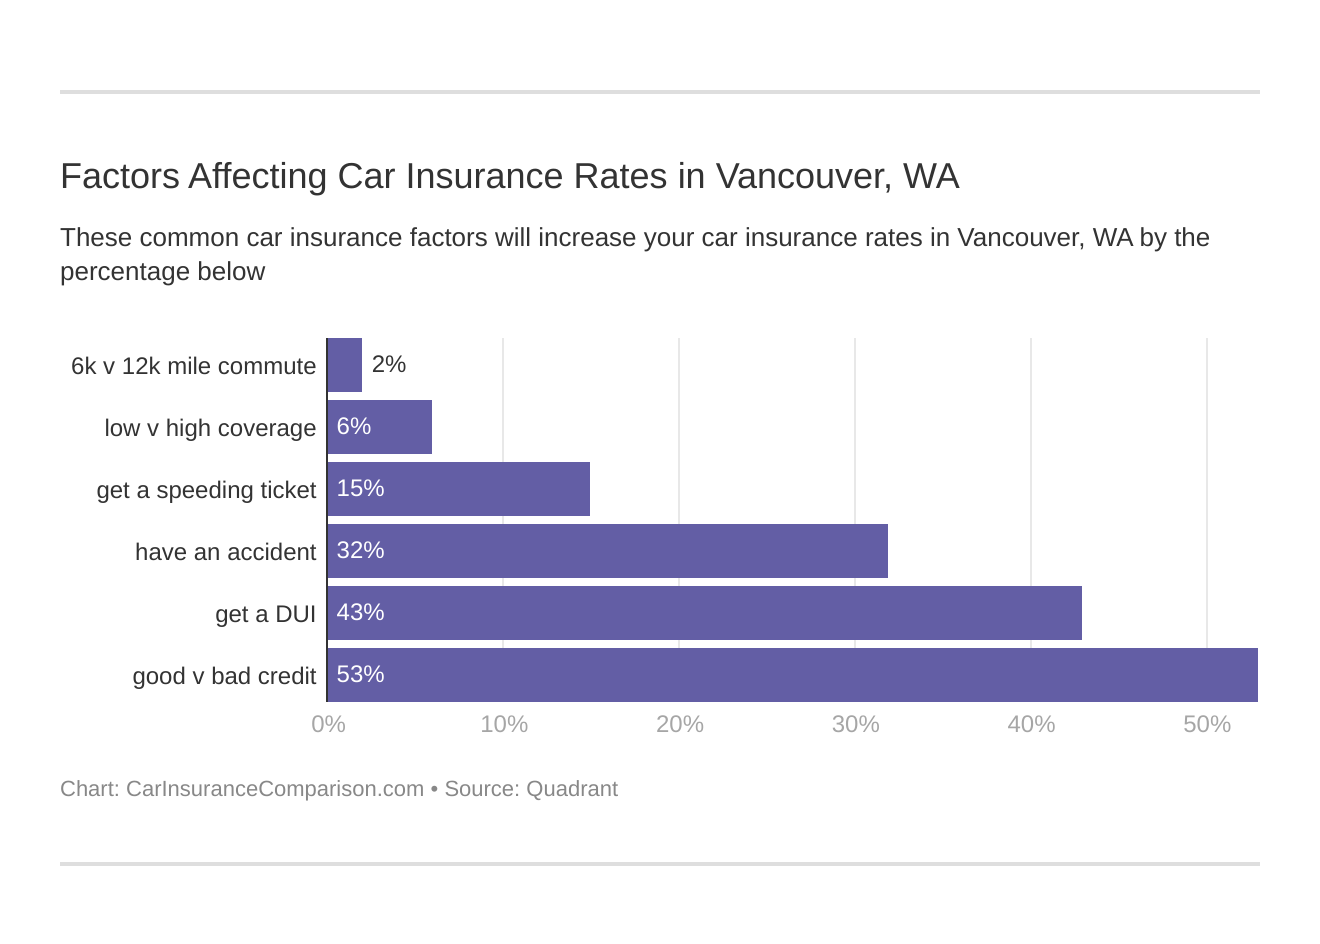 Factors Affecting Car Insurance Rates in Vancouver, WA